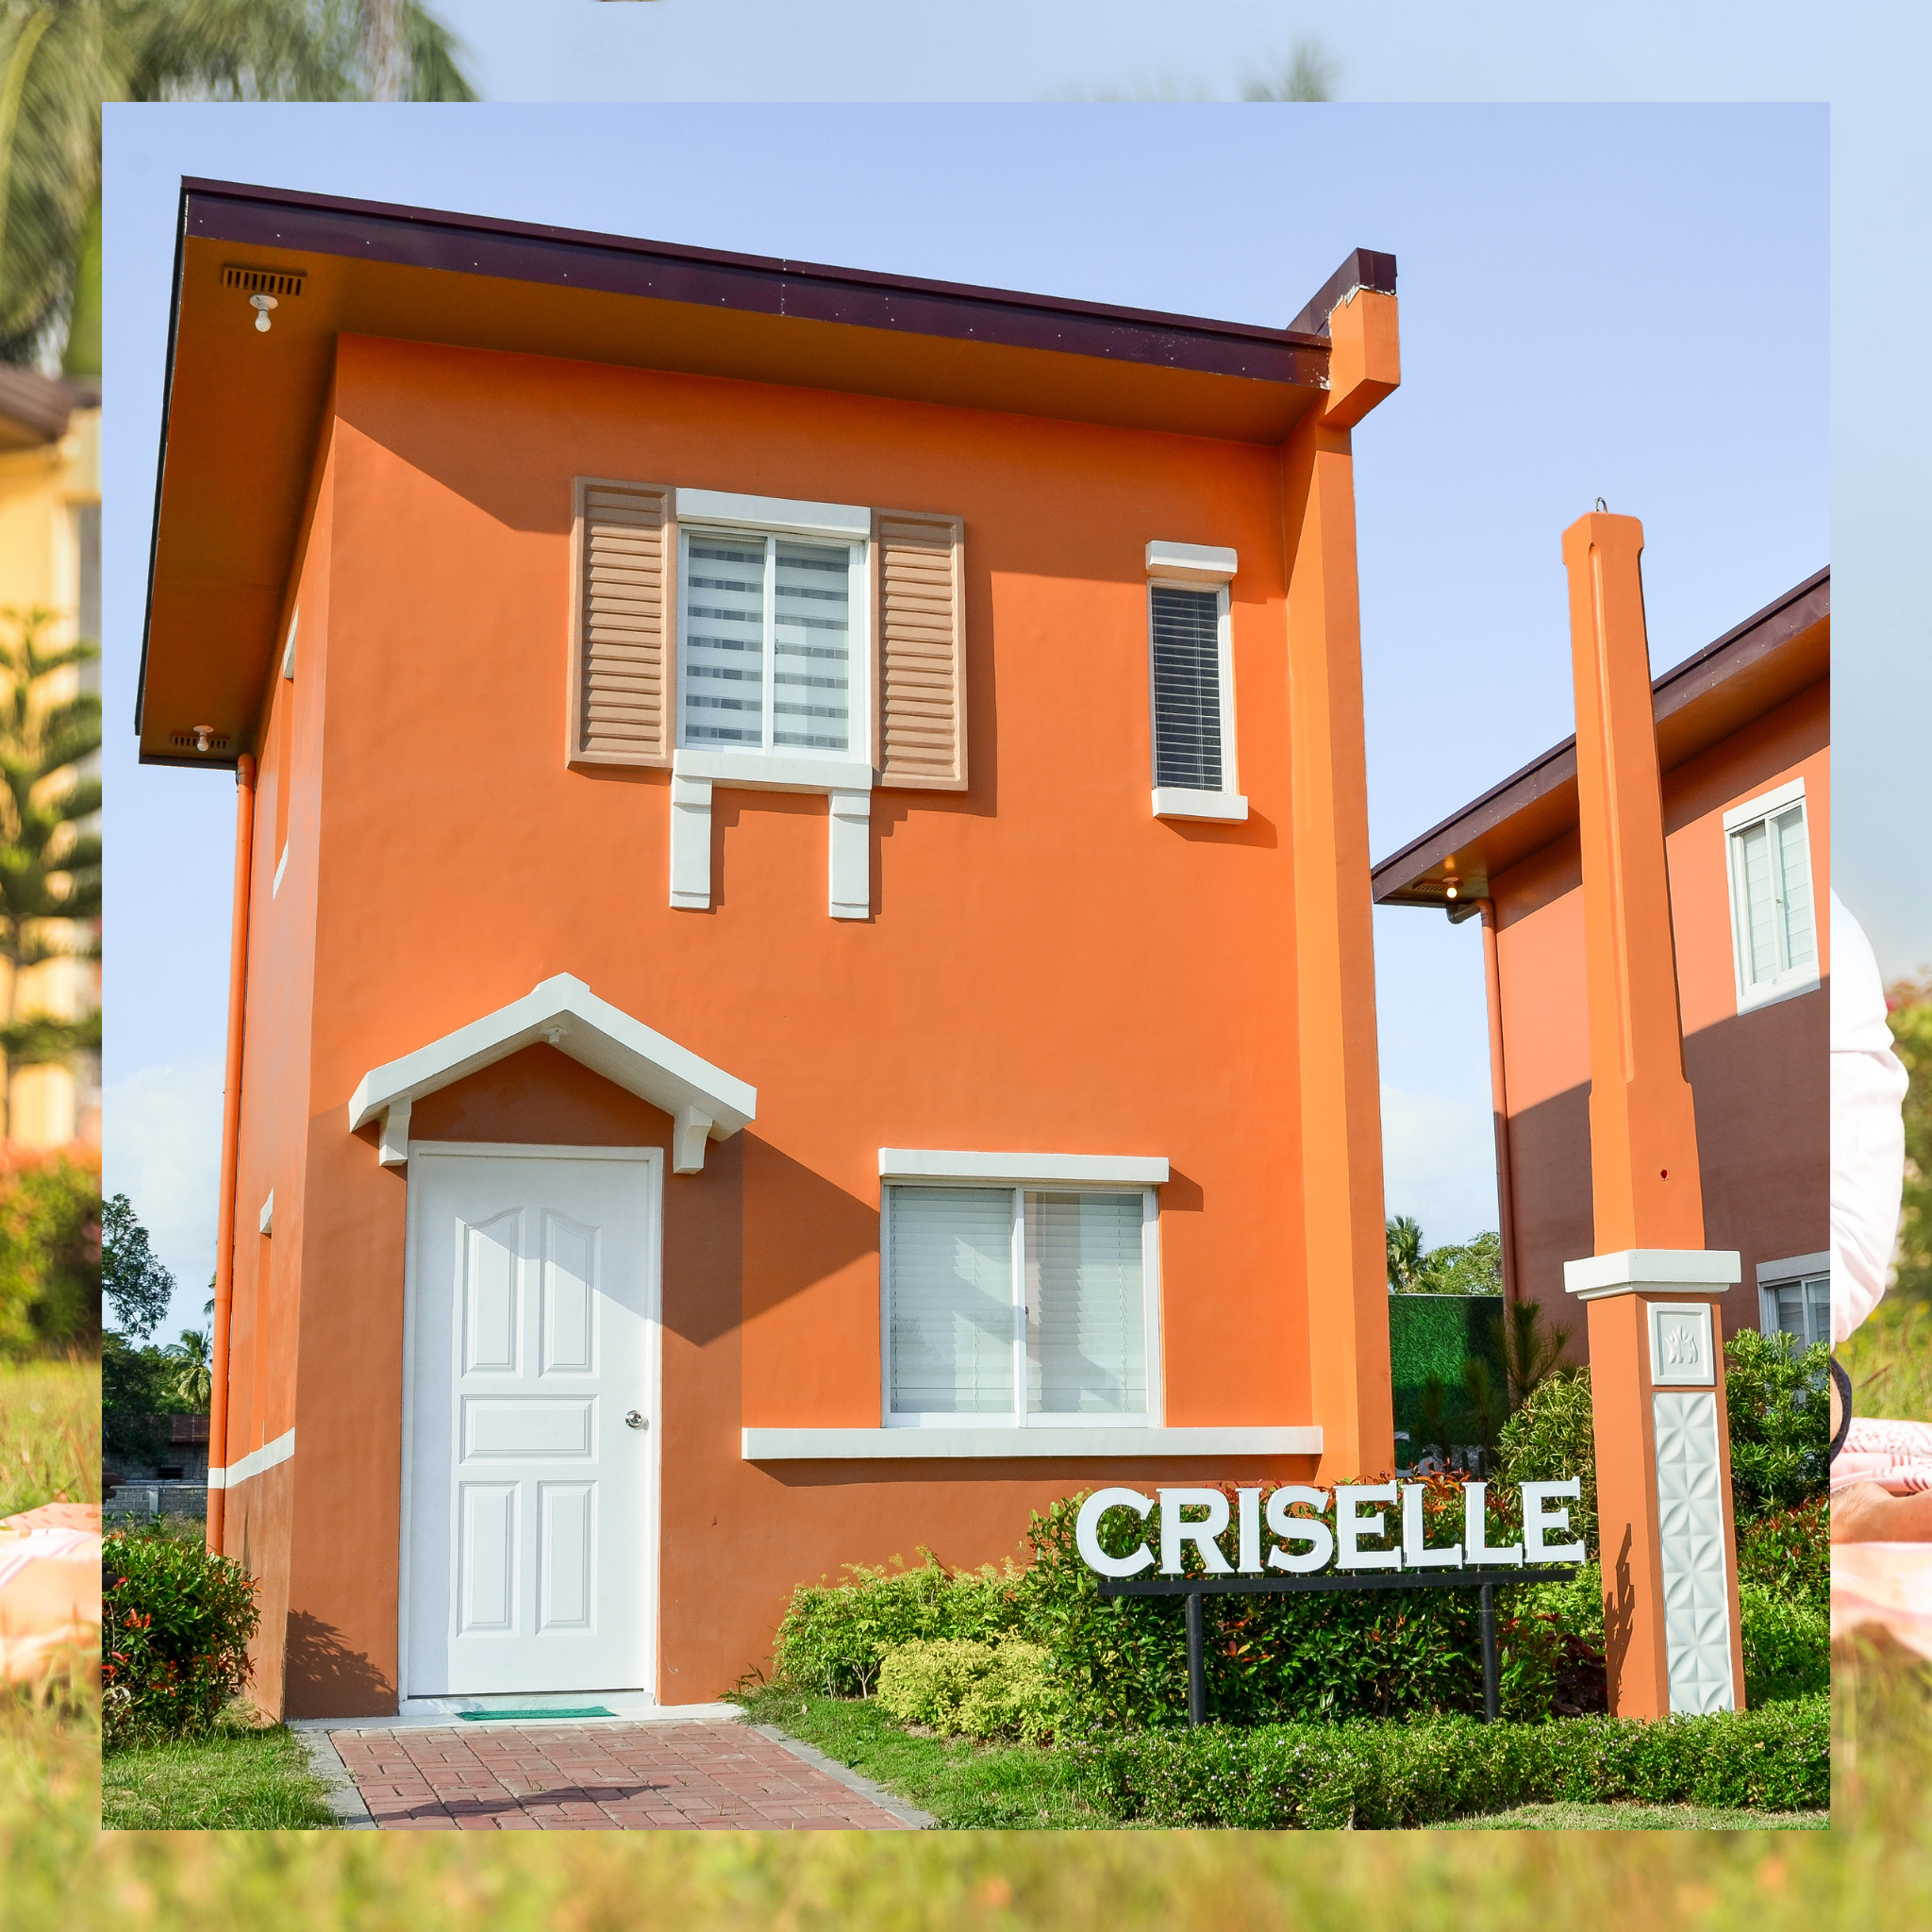 2BR Affordable House and Lot in San Juan Batangas – Criselle